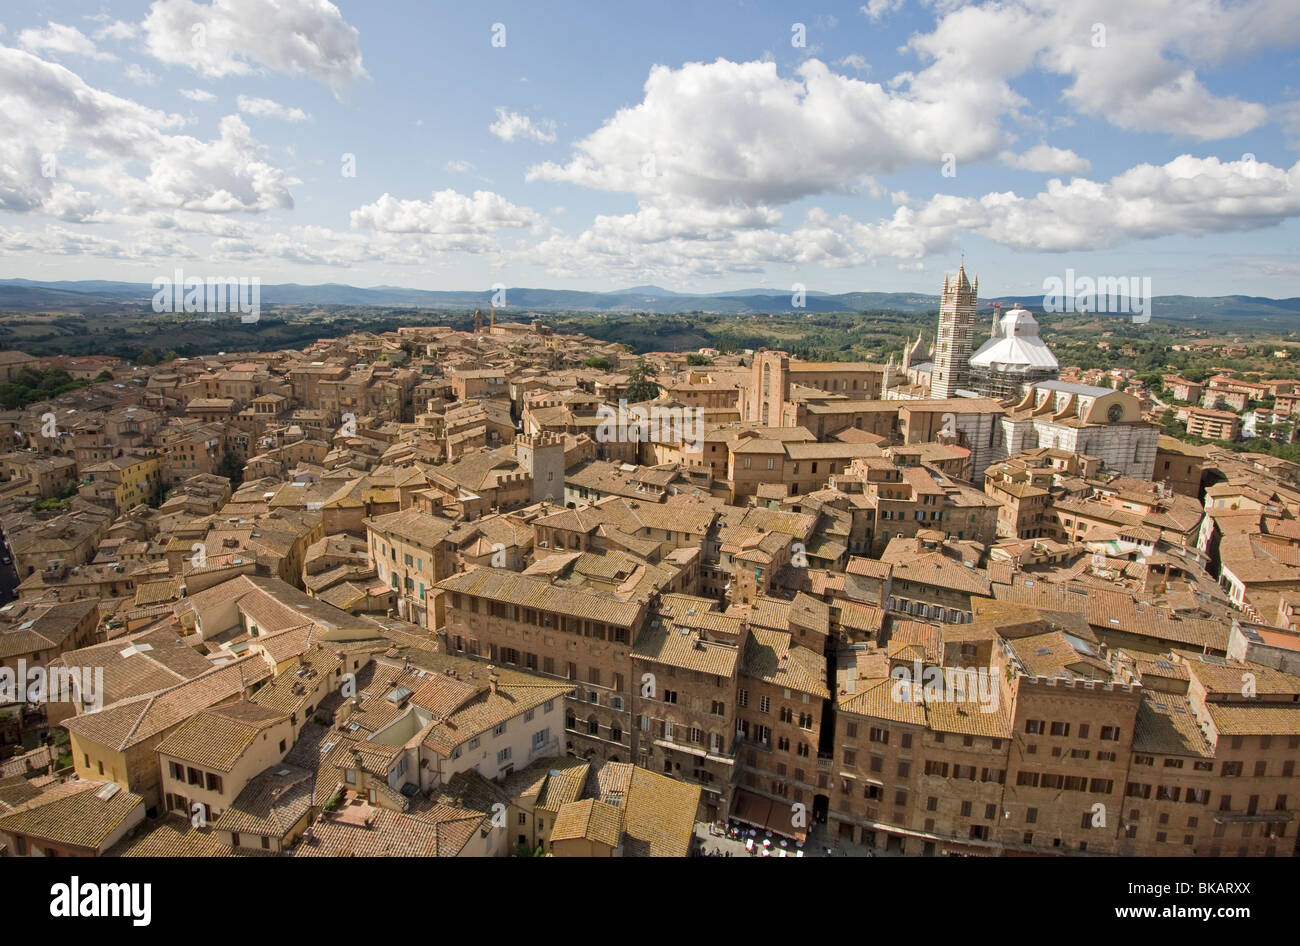 View from the tower of Mangia at Siena, Italy Stock Photo